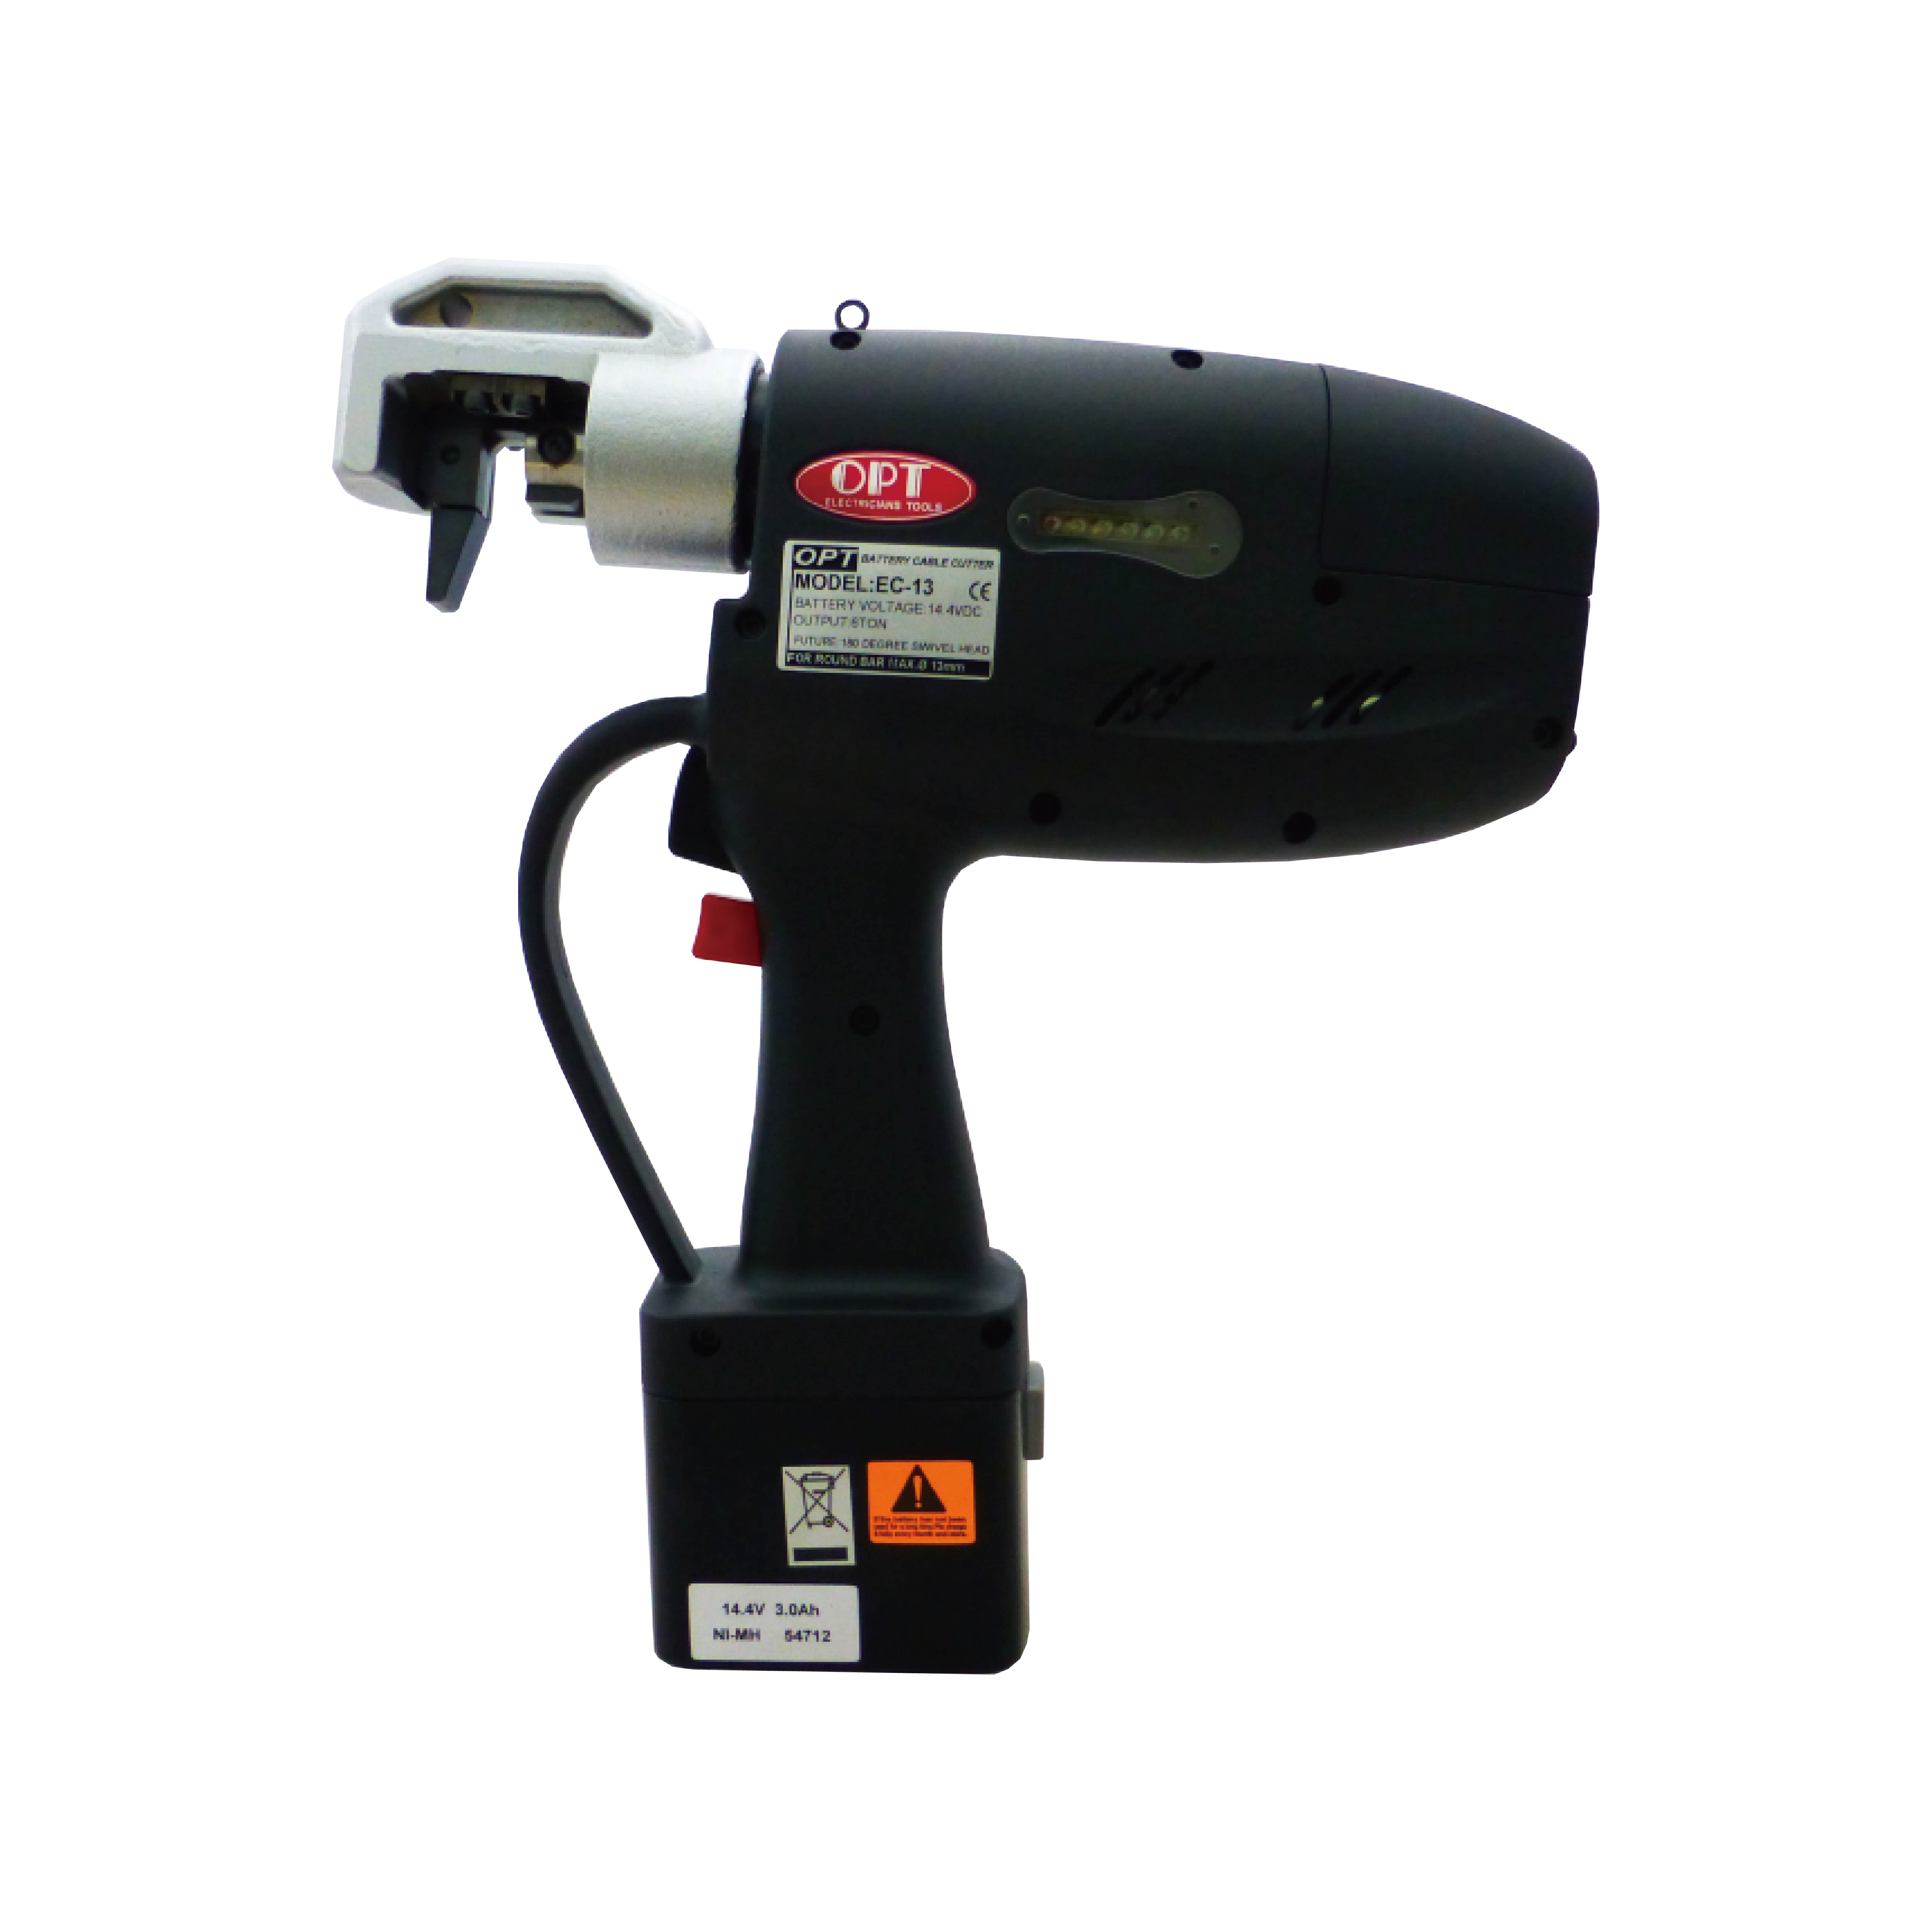 ECL-13 CORDLESS HYDRAULIC CABLE CUTTERS